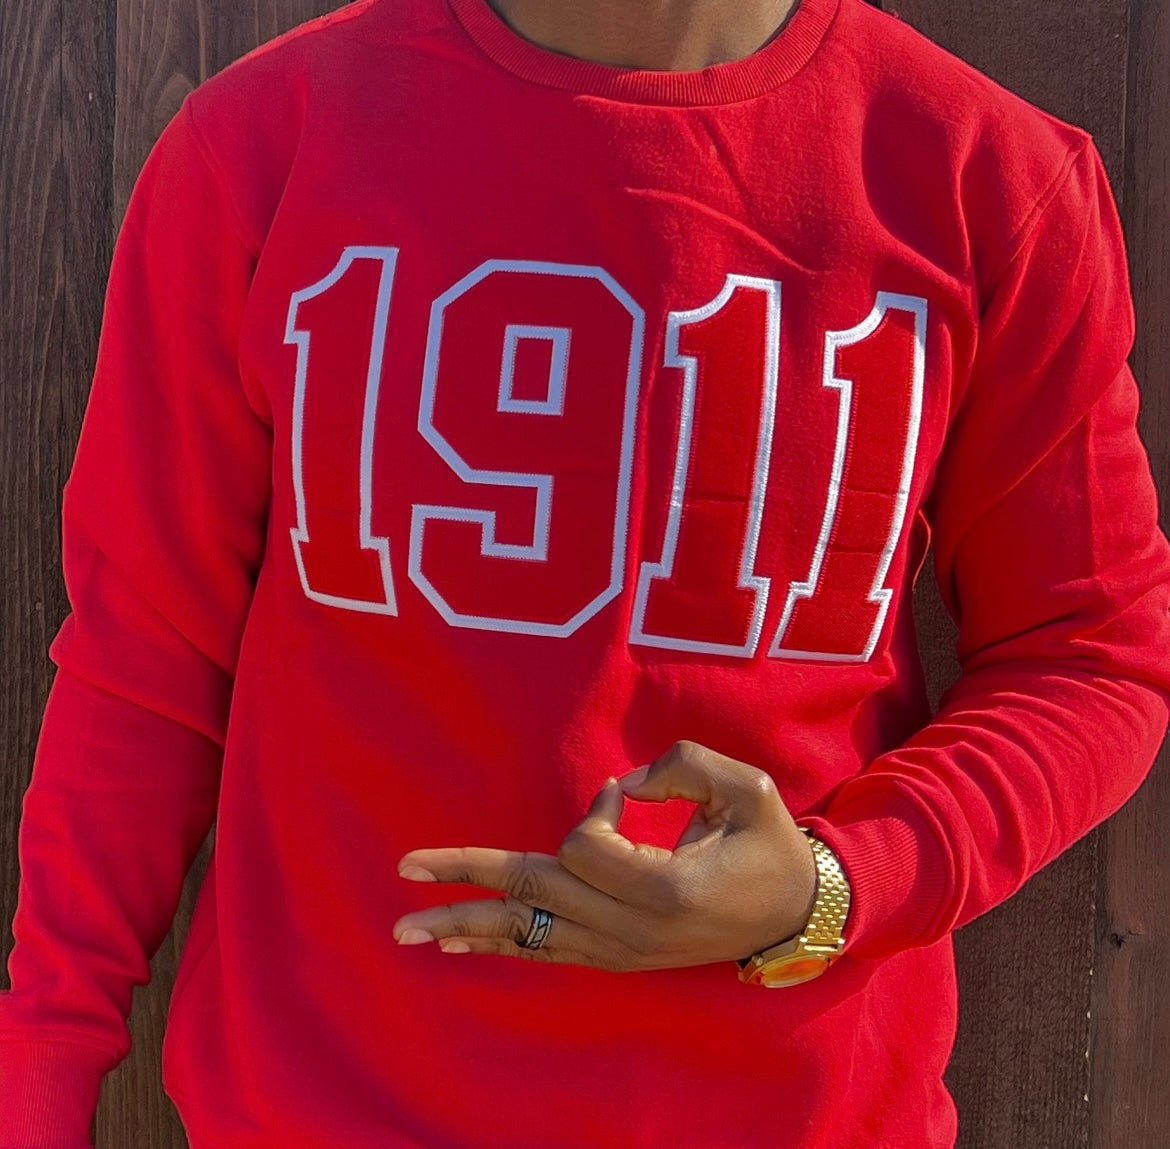 Exclusive Kappa Alpha Psi Double Stitched Appliqué Embroidery Lettered Sweater. This is the perfect long-sleeved Sweater to wear while showing off your Kappa Alpha Psi fraternity lettering. A comfortable 100% cotton tee with a twill Greek letters embroidery across the chest give you the perfect fit. This sweater is also a perfect gift for your favorite Kappa Man.